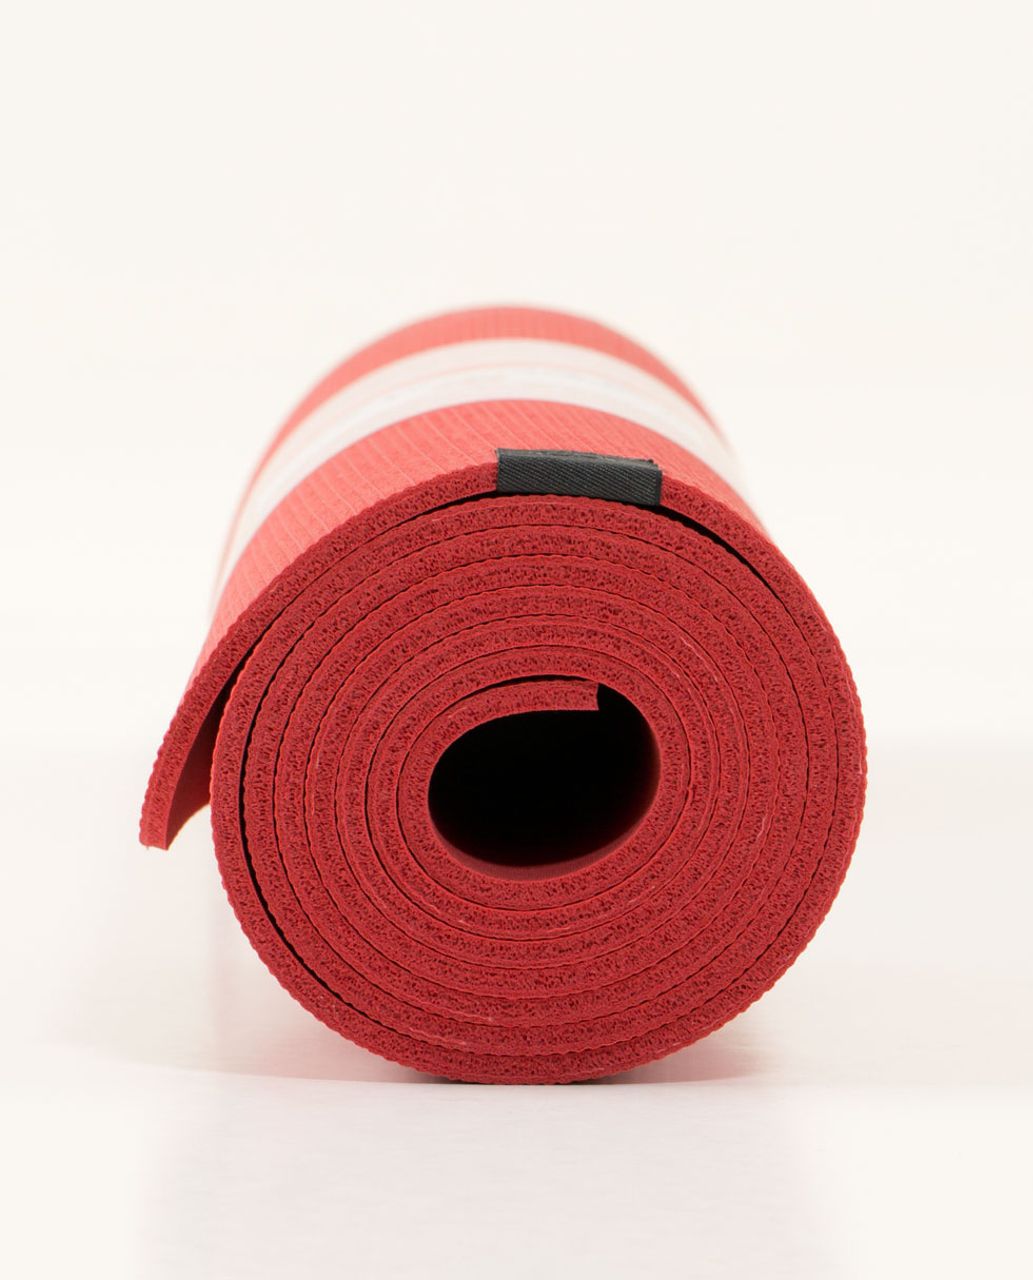 Lululemon The Pure Mat 5mm - Love Red